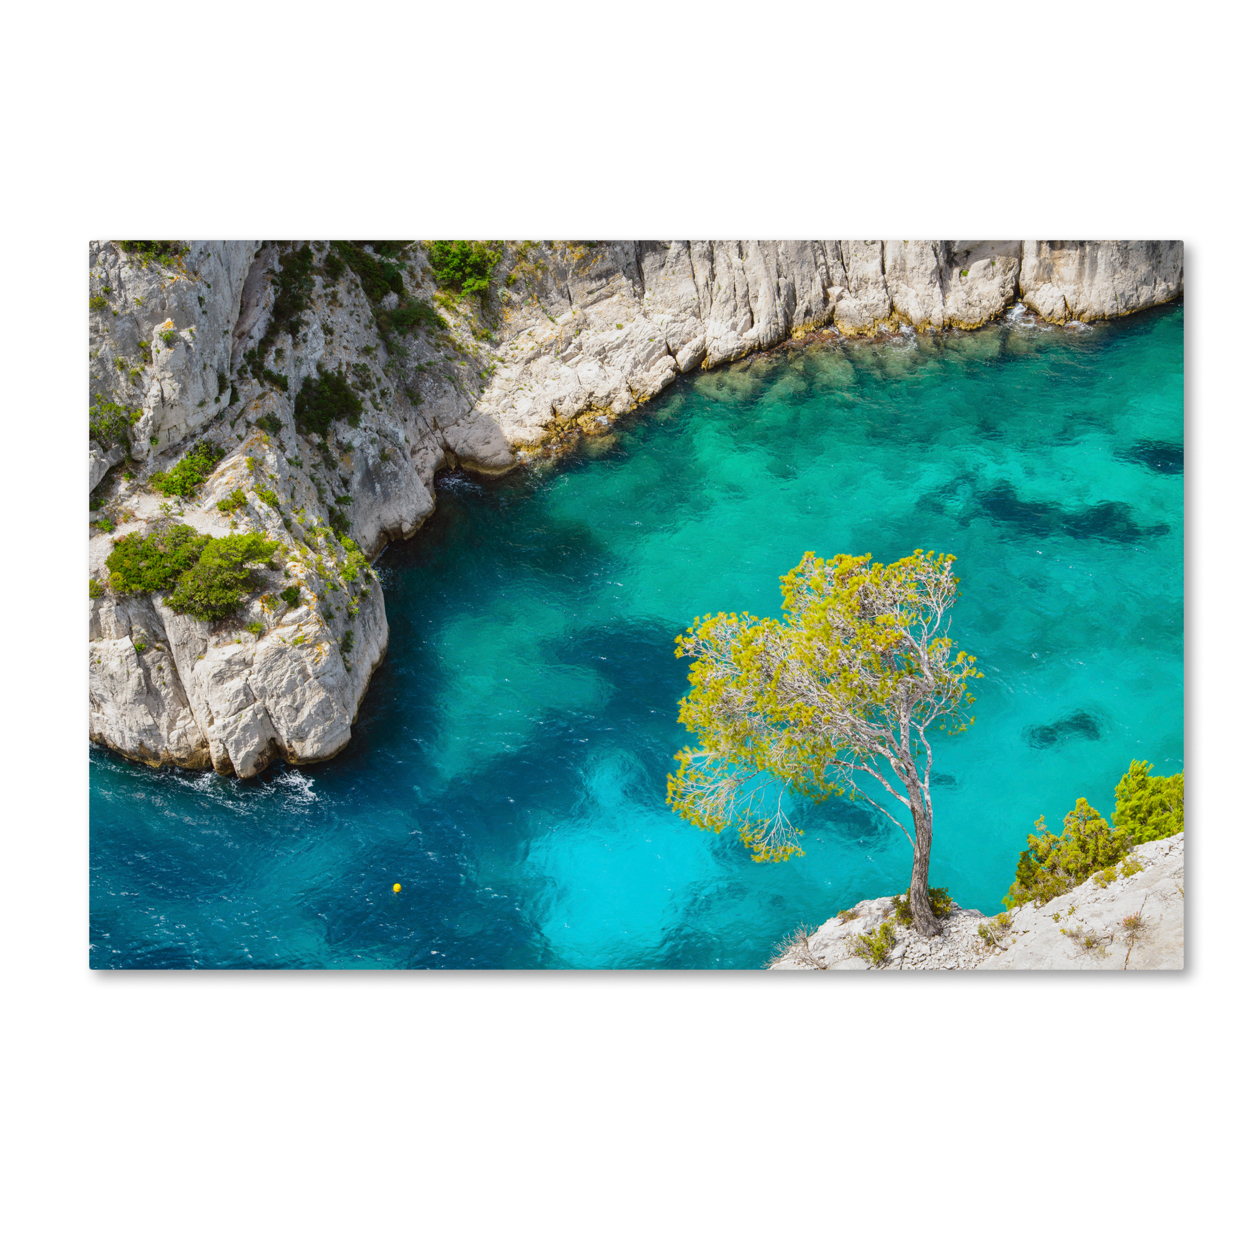 Michael Blanchette Photography 'Turquoise Waters' Canvas Art 16 X 24